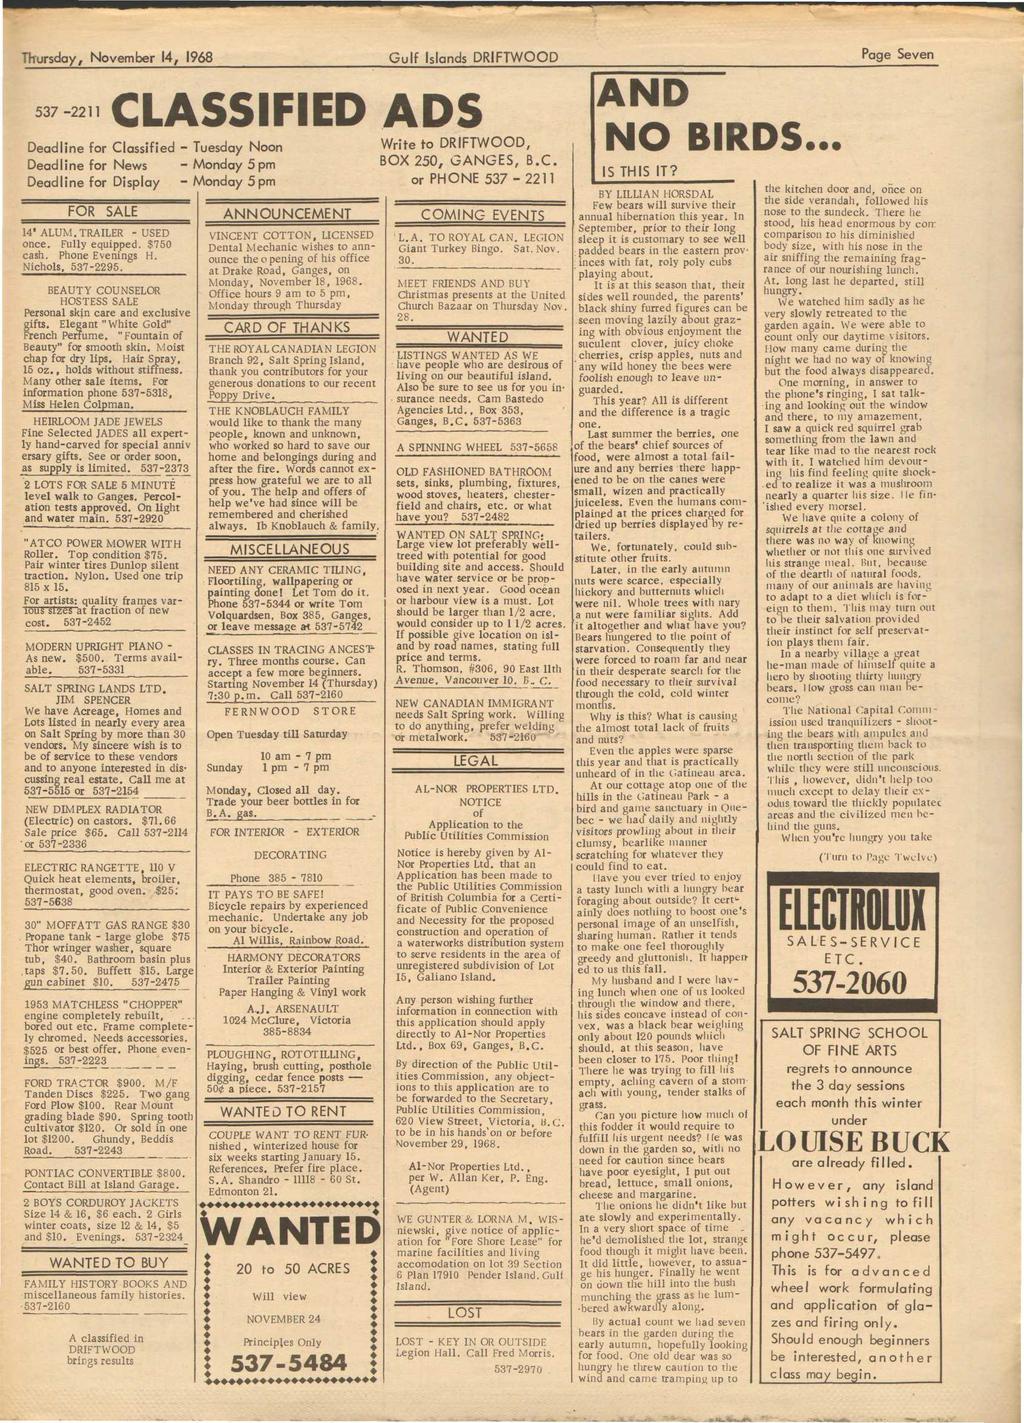 A- - f -ta -IV Thursday, November 14, 1968 Gulf Islands DRIFTWOOD Page Seven 537-2211 CLASSIFIED ADS Deadline for Classified - Tuesday Noon Deadline for News - Monday 5pm Deadline for Display -